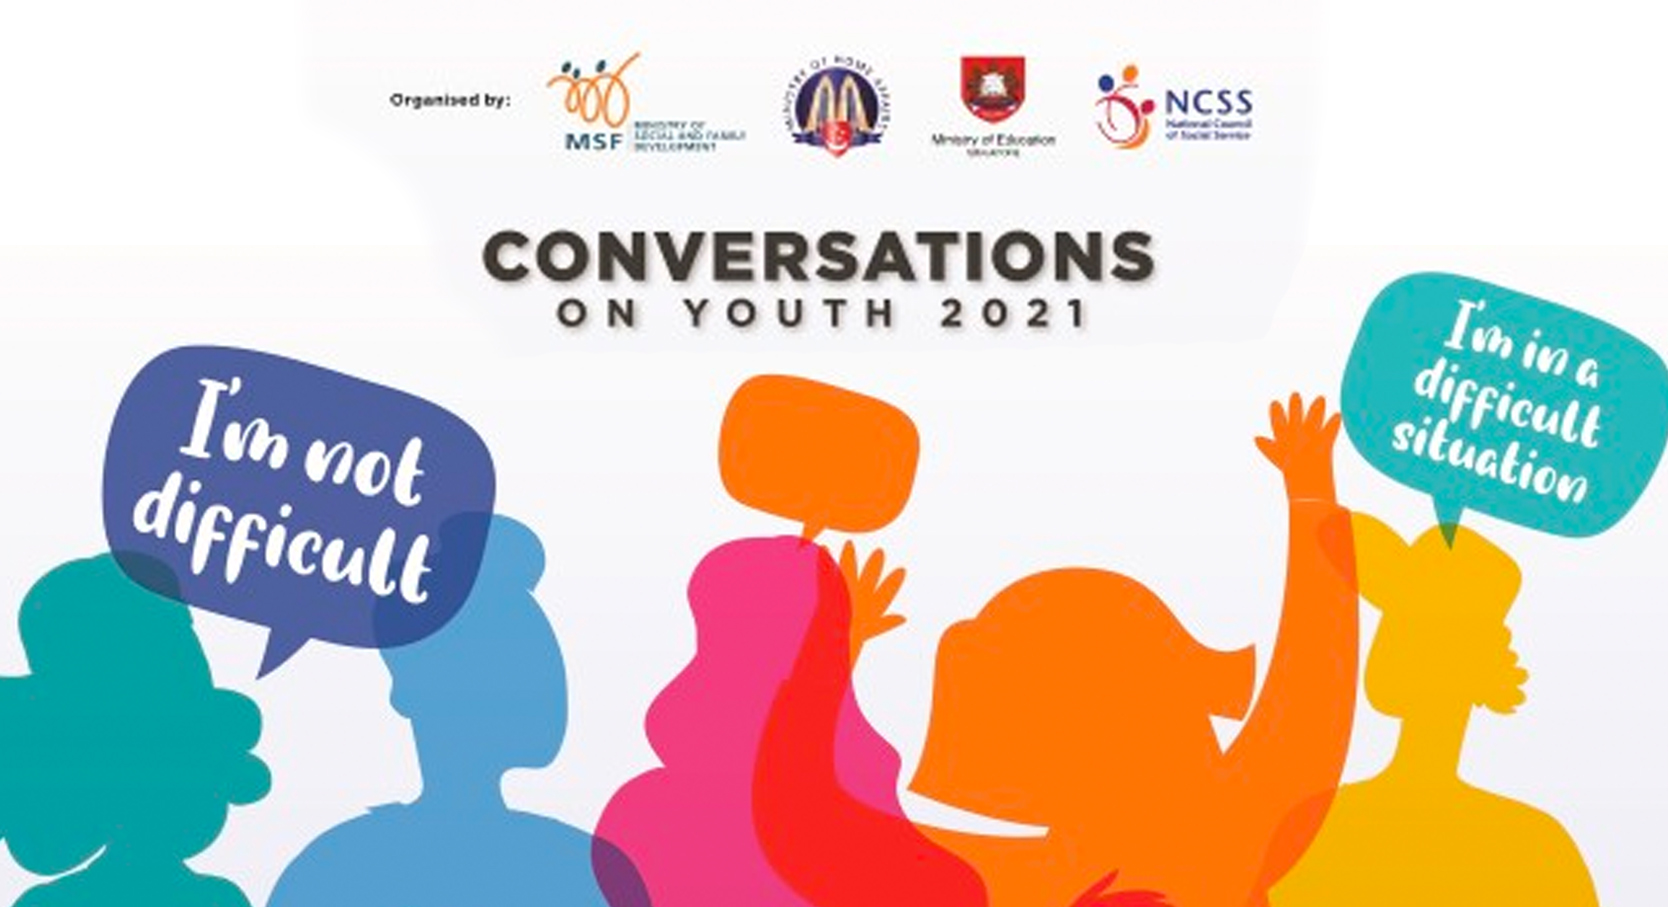 Conversations on Youth 2021